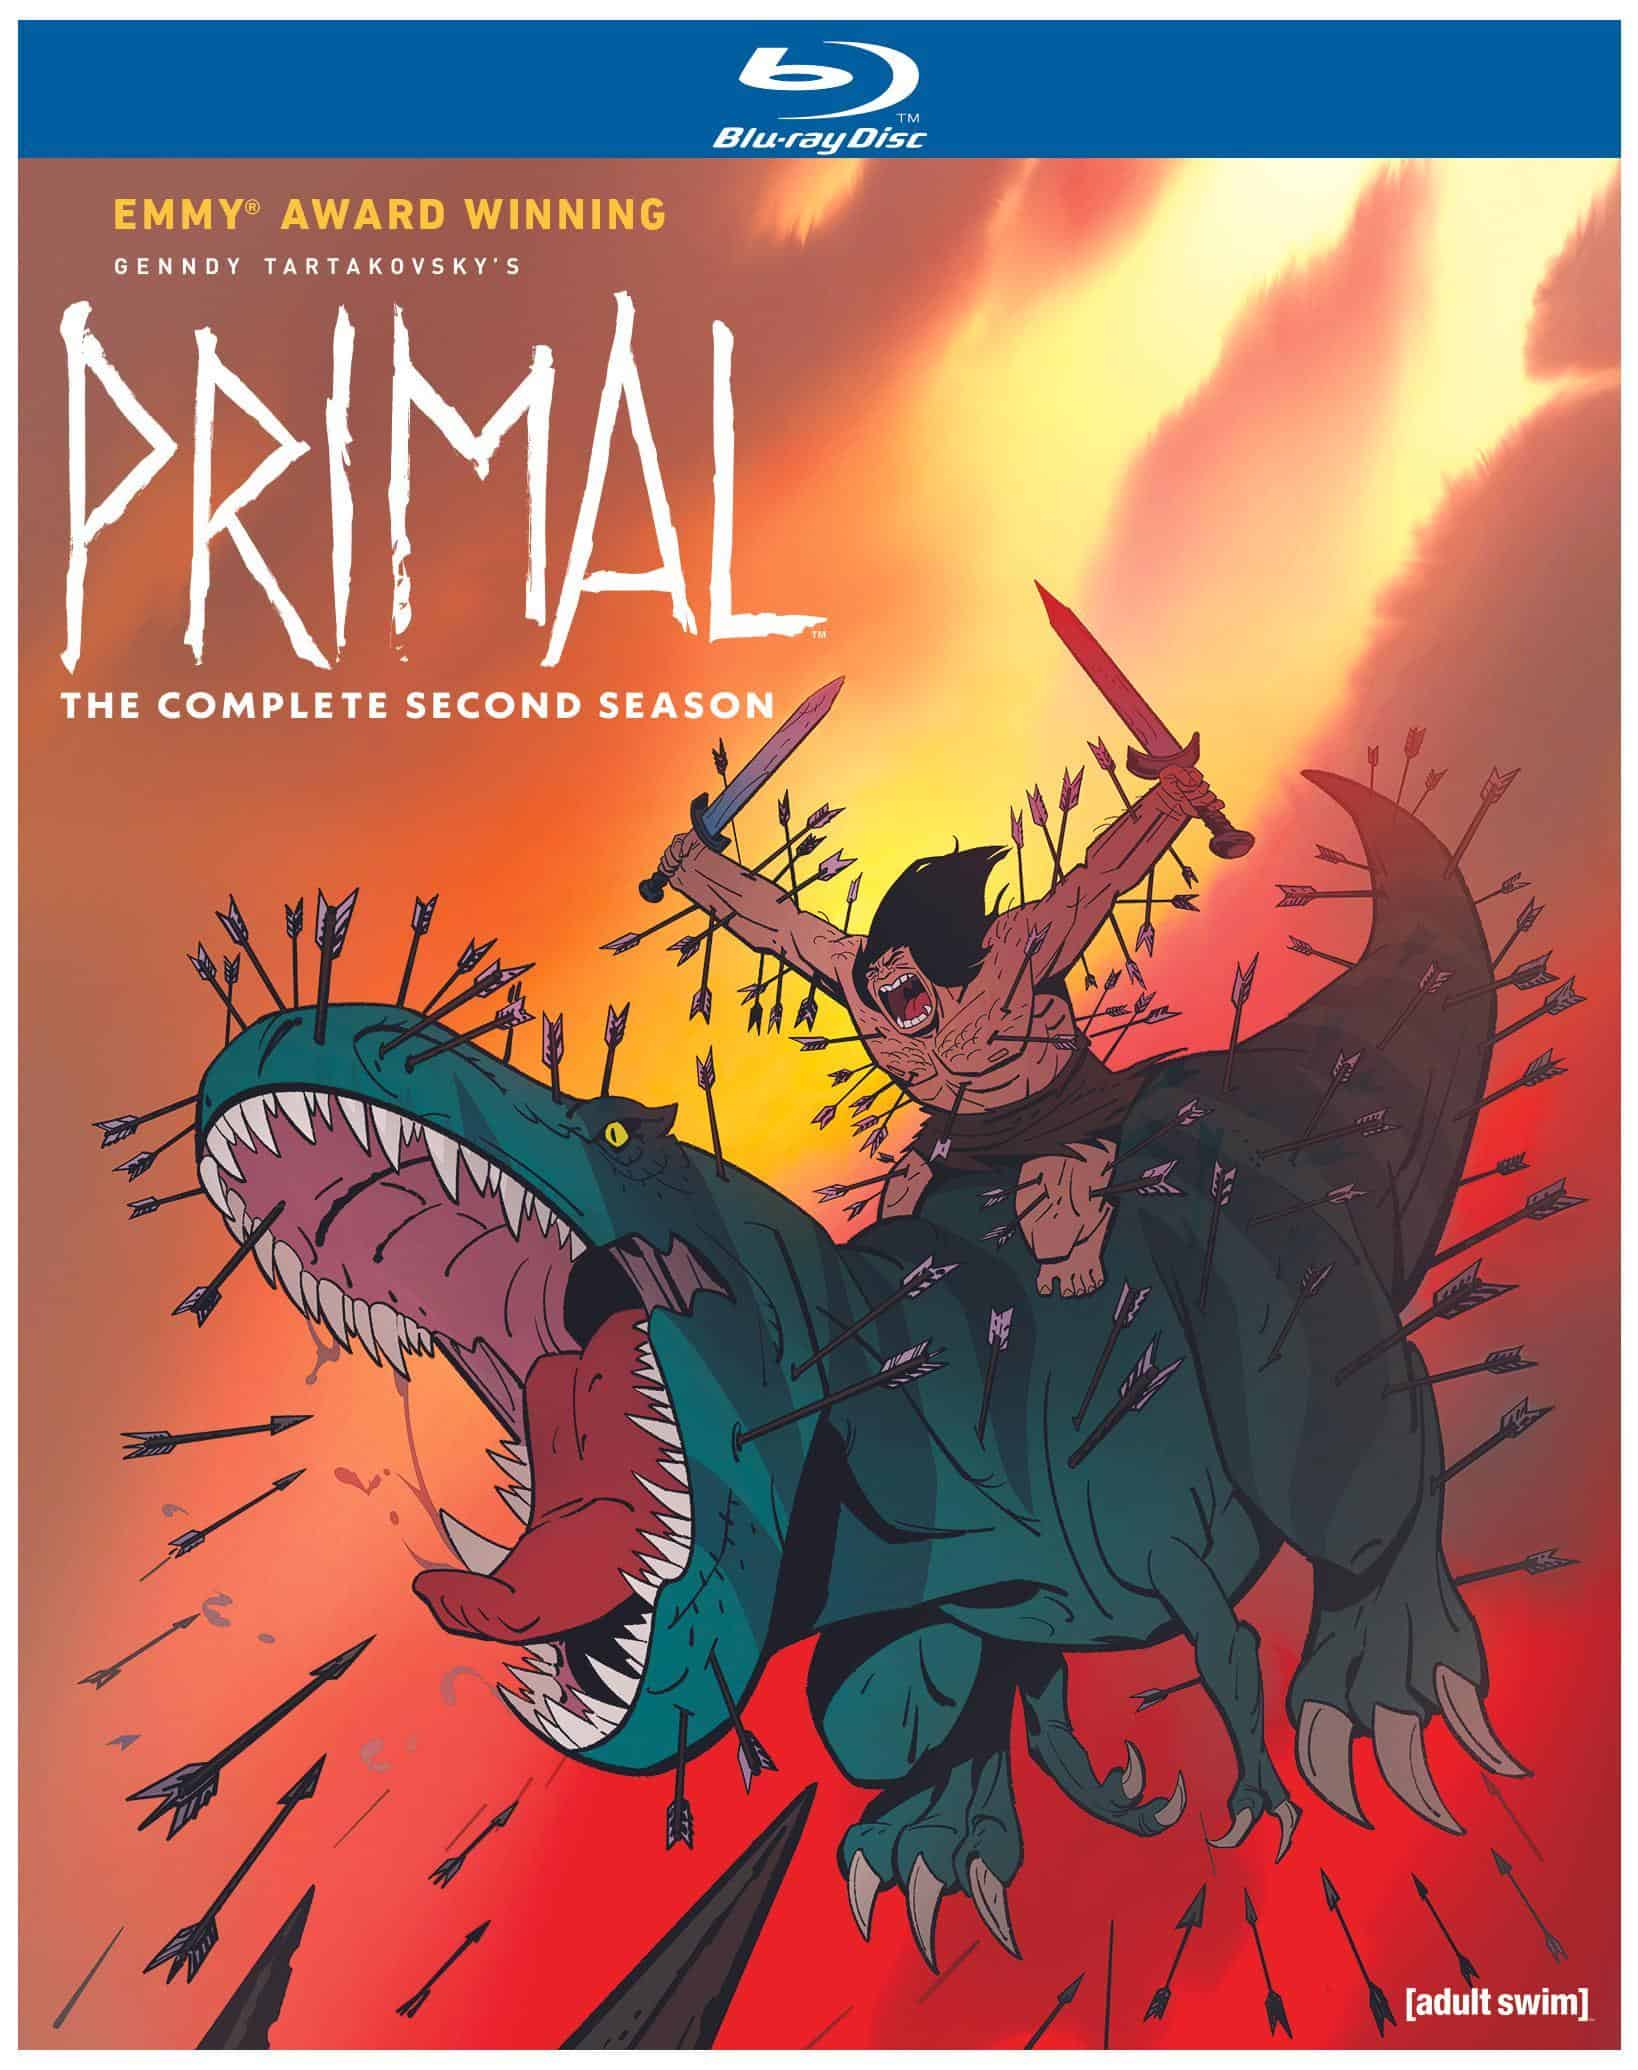 Primal: The Complete Second Season comes to Blu-ray April 25th 17